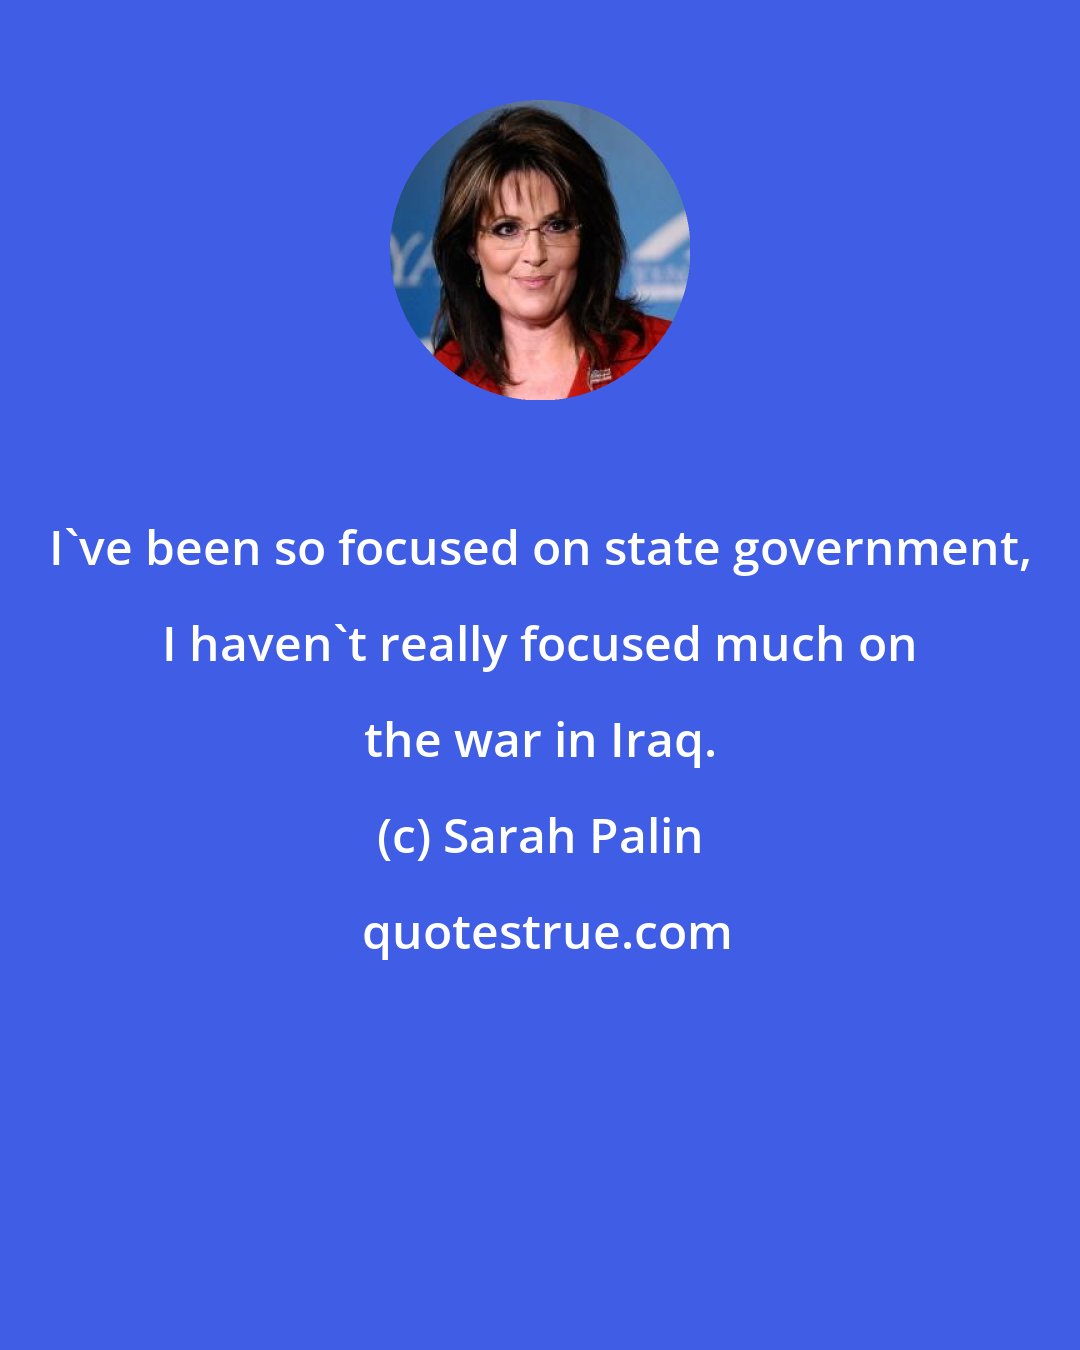 Sarah Palin: I've been so focused on state government, I haven't really focused much on the war in Iraq.